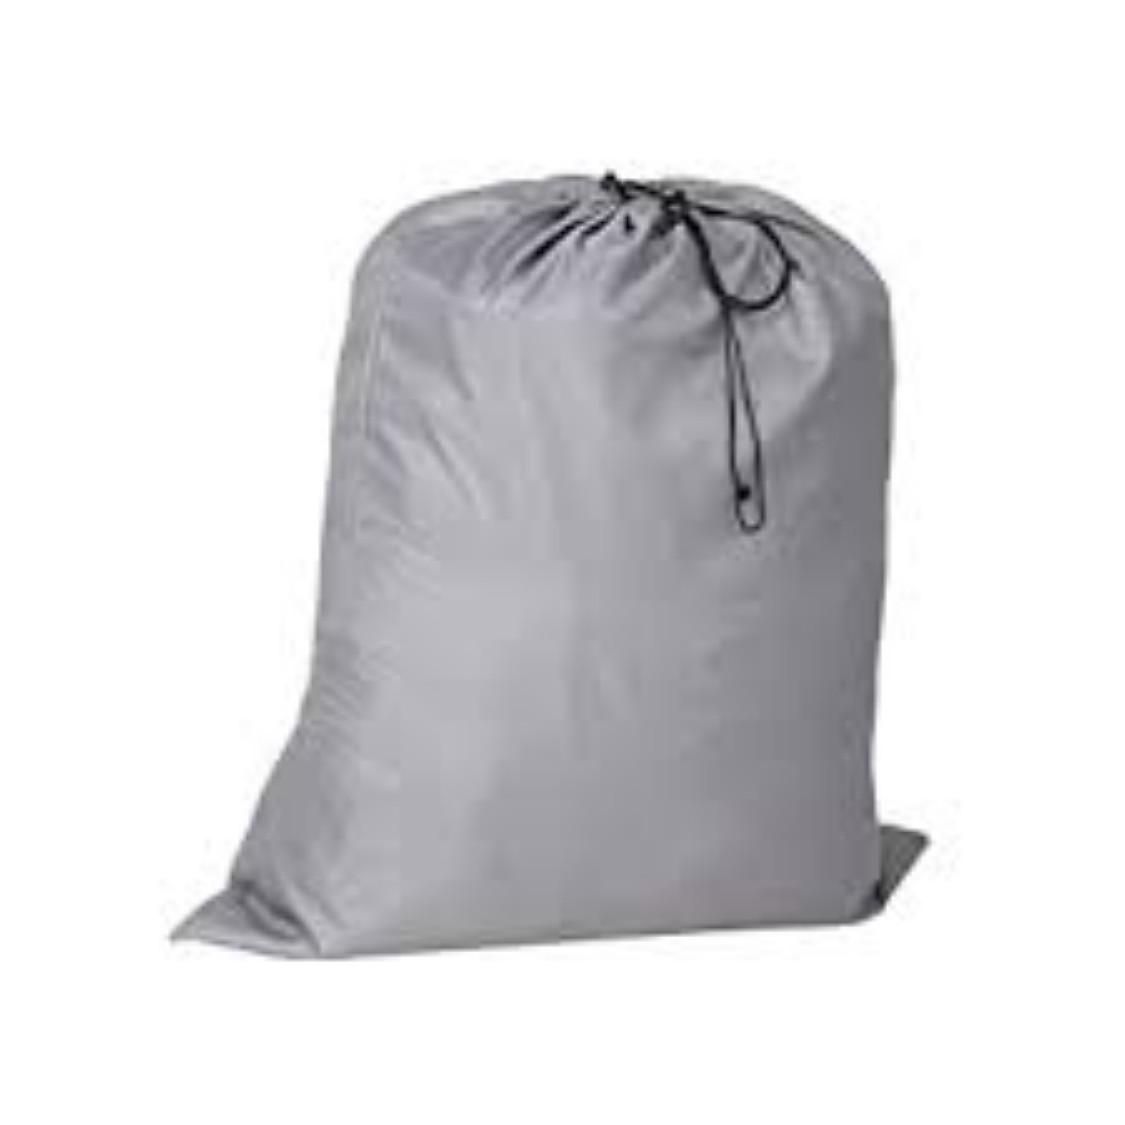 Buy Plastic Laundry Bag 40 L 40 x 35 x 50 cm Grey online at best rates in  India | L&T-SuFin